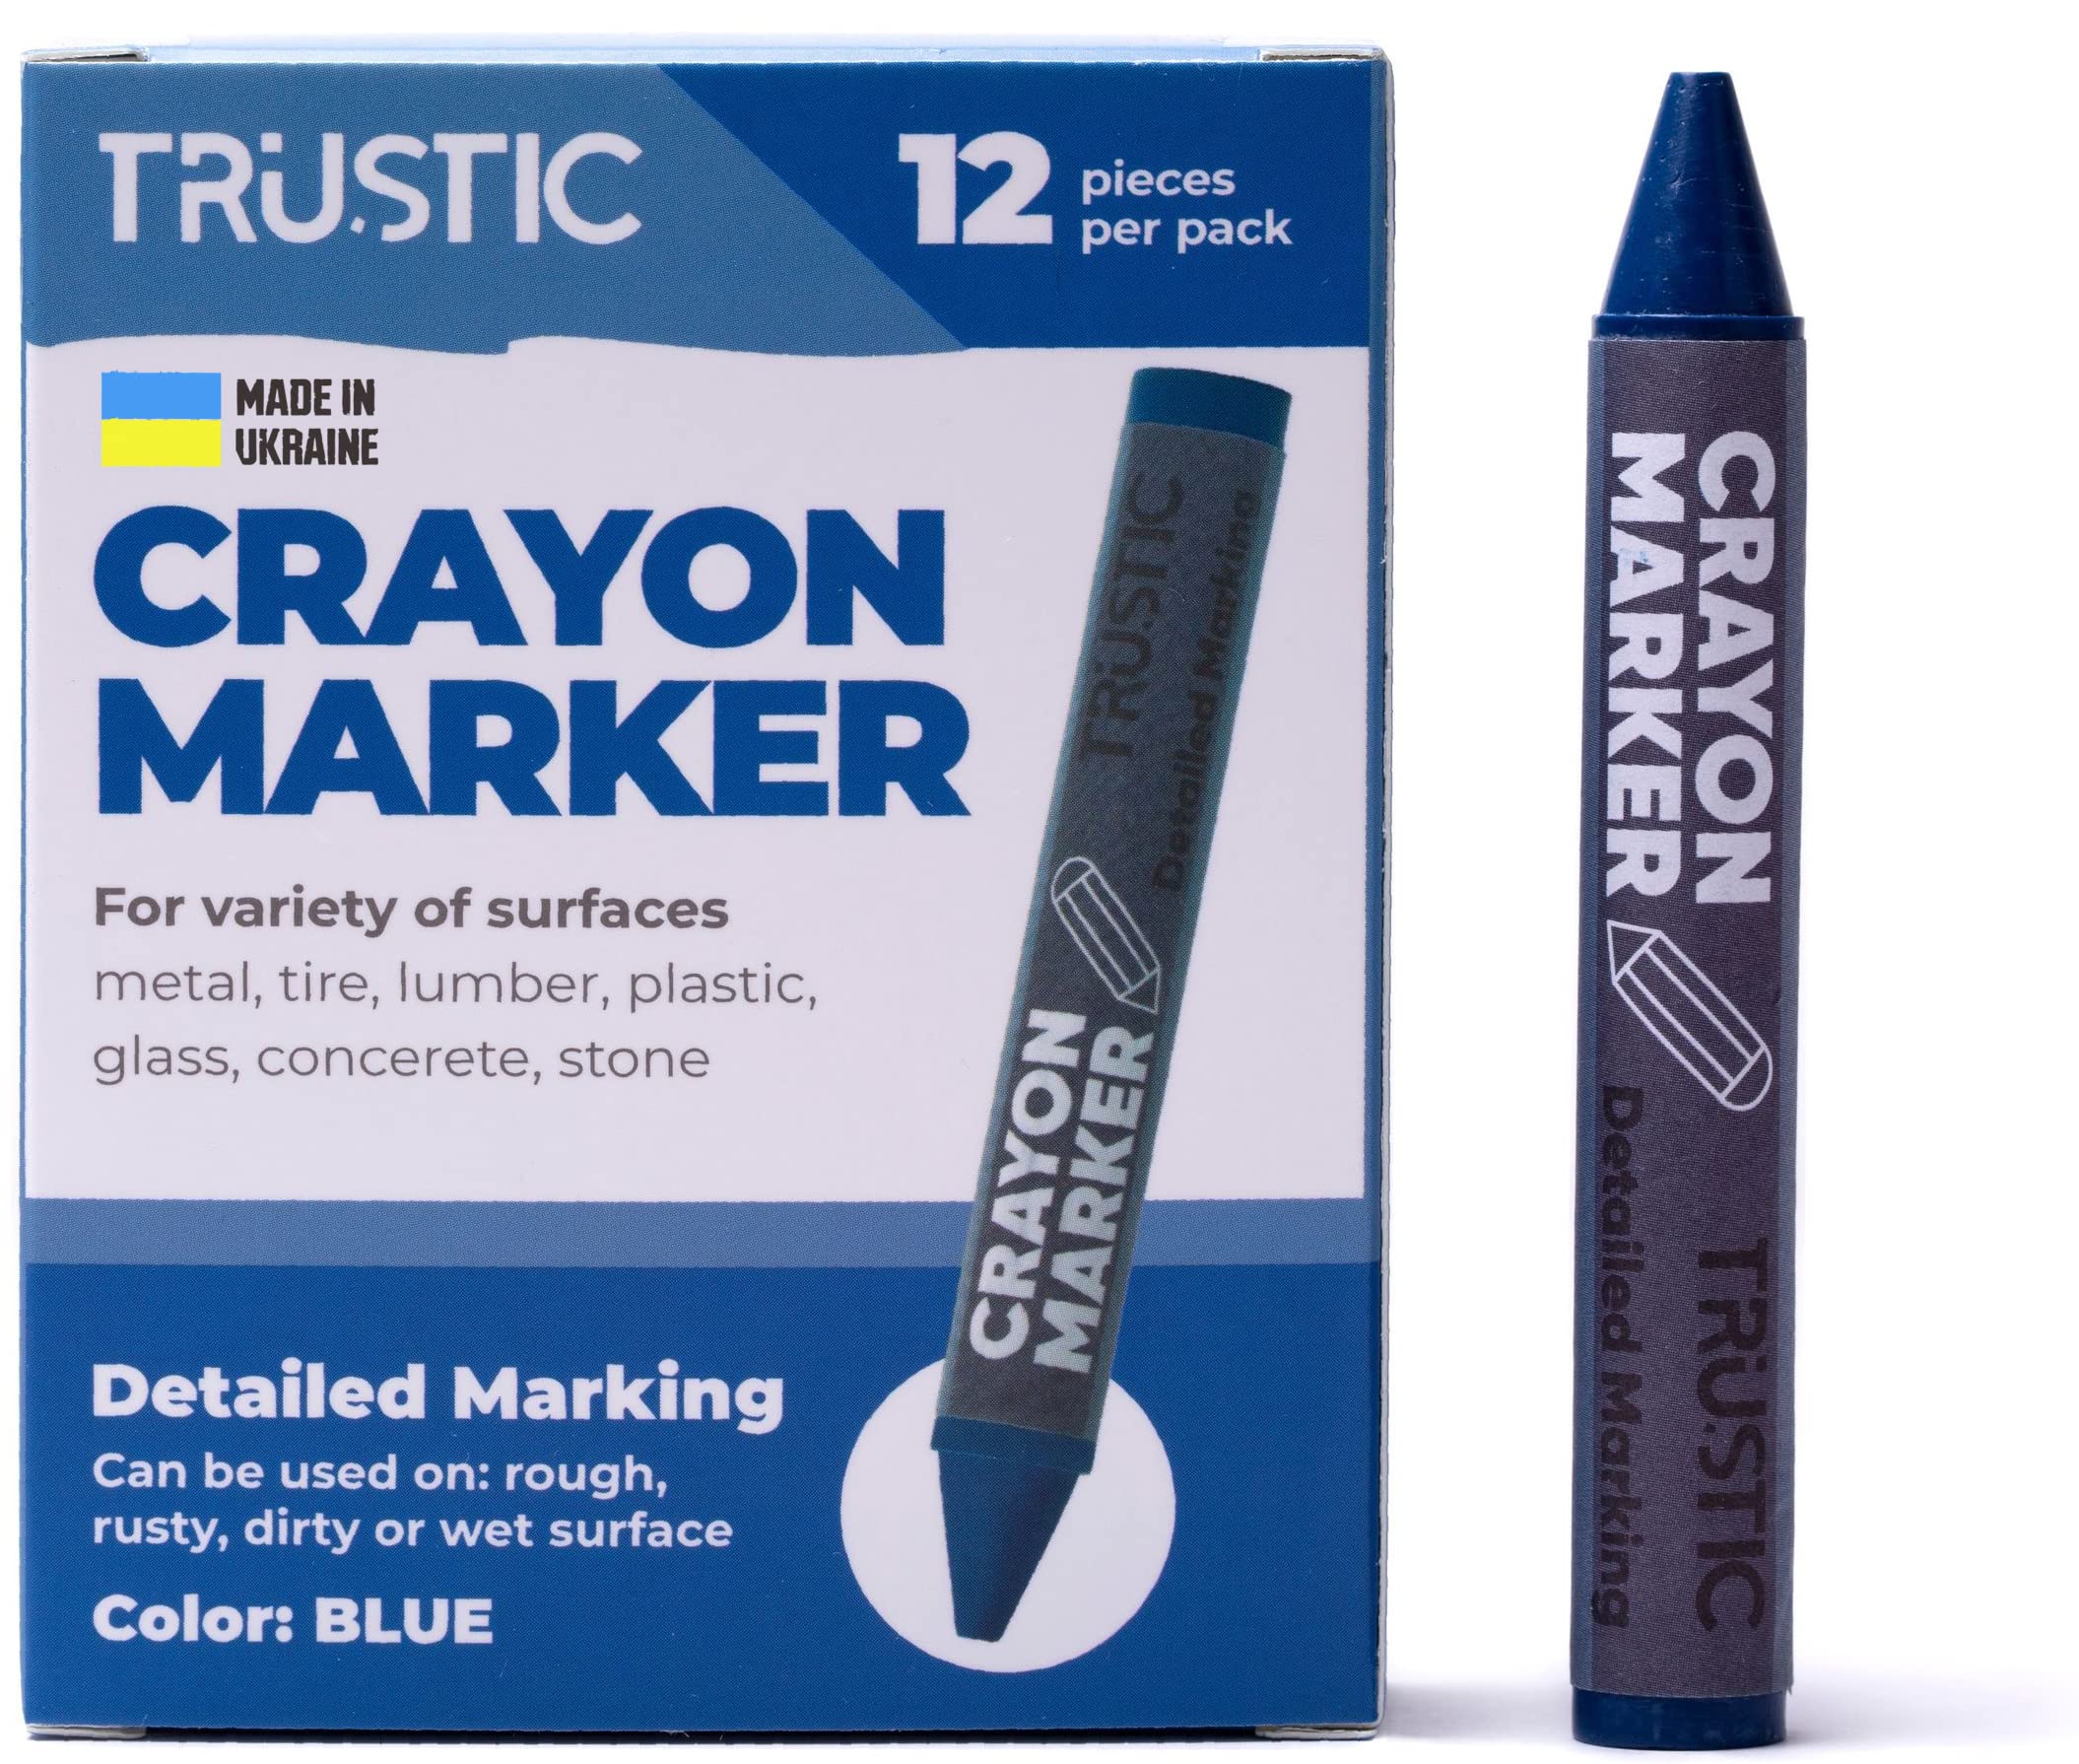 Trustic Universal Crayon Wax Marker for Industrial and Craft Detailed Marking on Lumber Metal Carton Ceramics Concrete Glass Plastic Tire 4 x 1/2", Pack of 12  - Like New